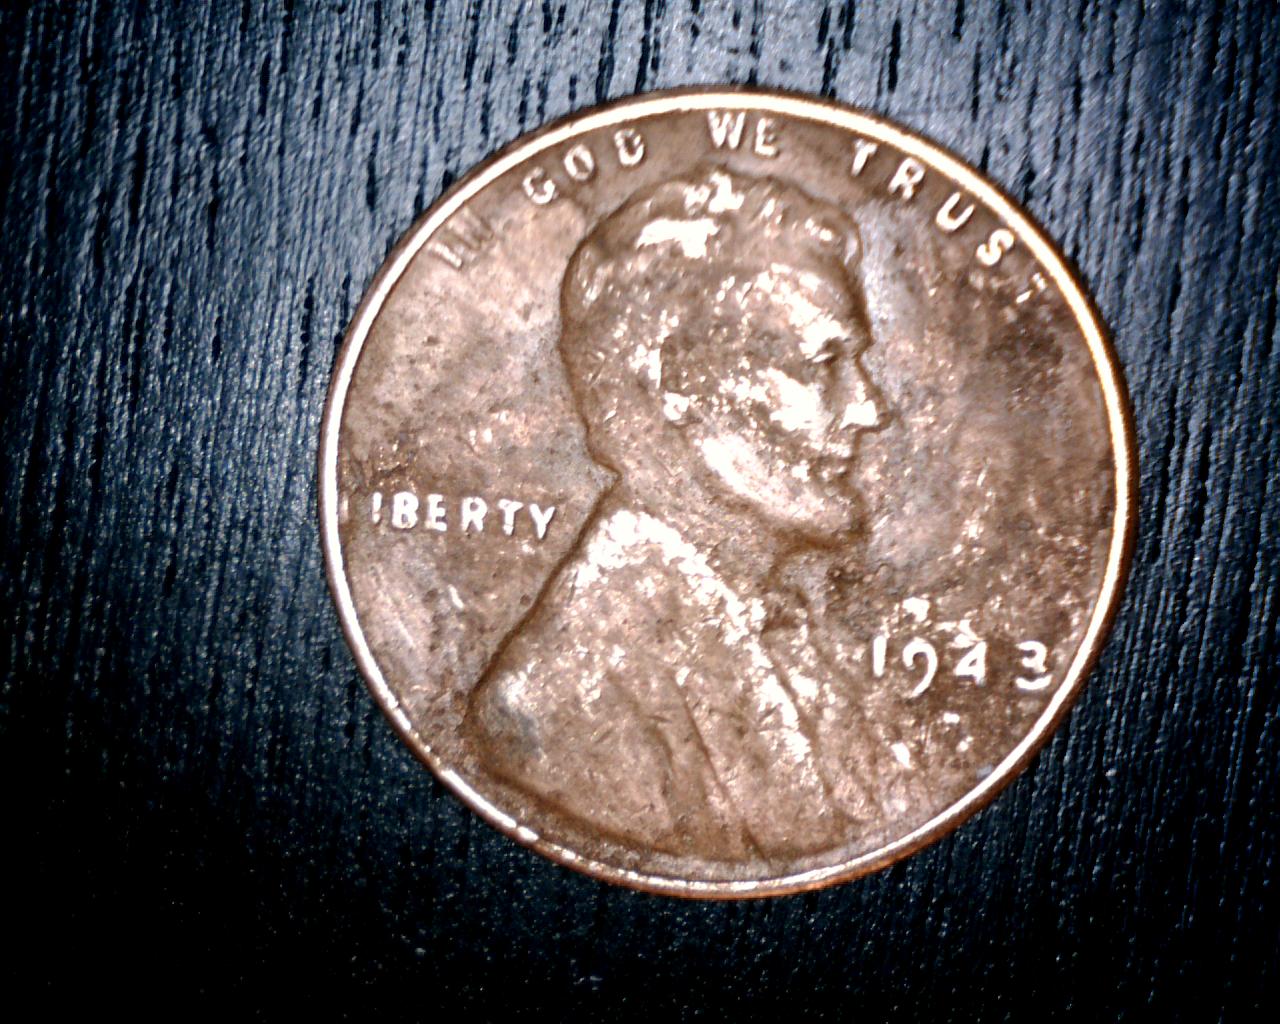 How do you clean copper pennies?